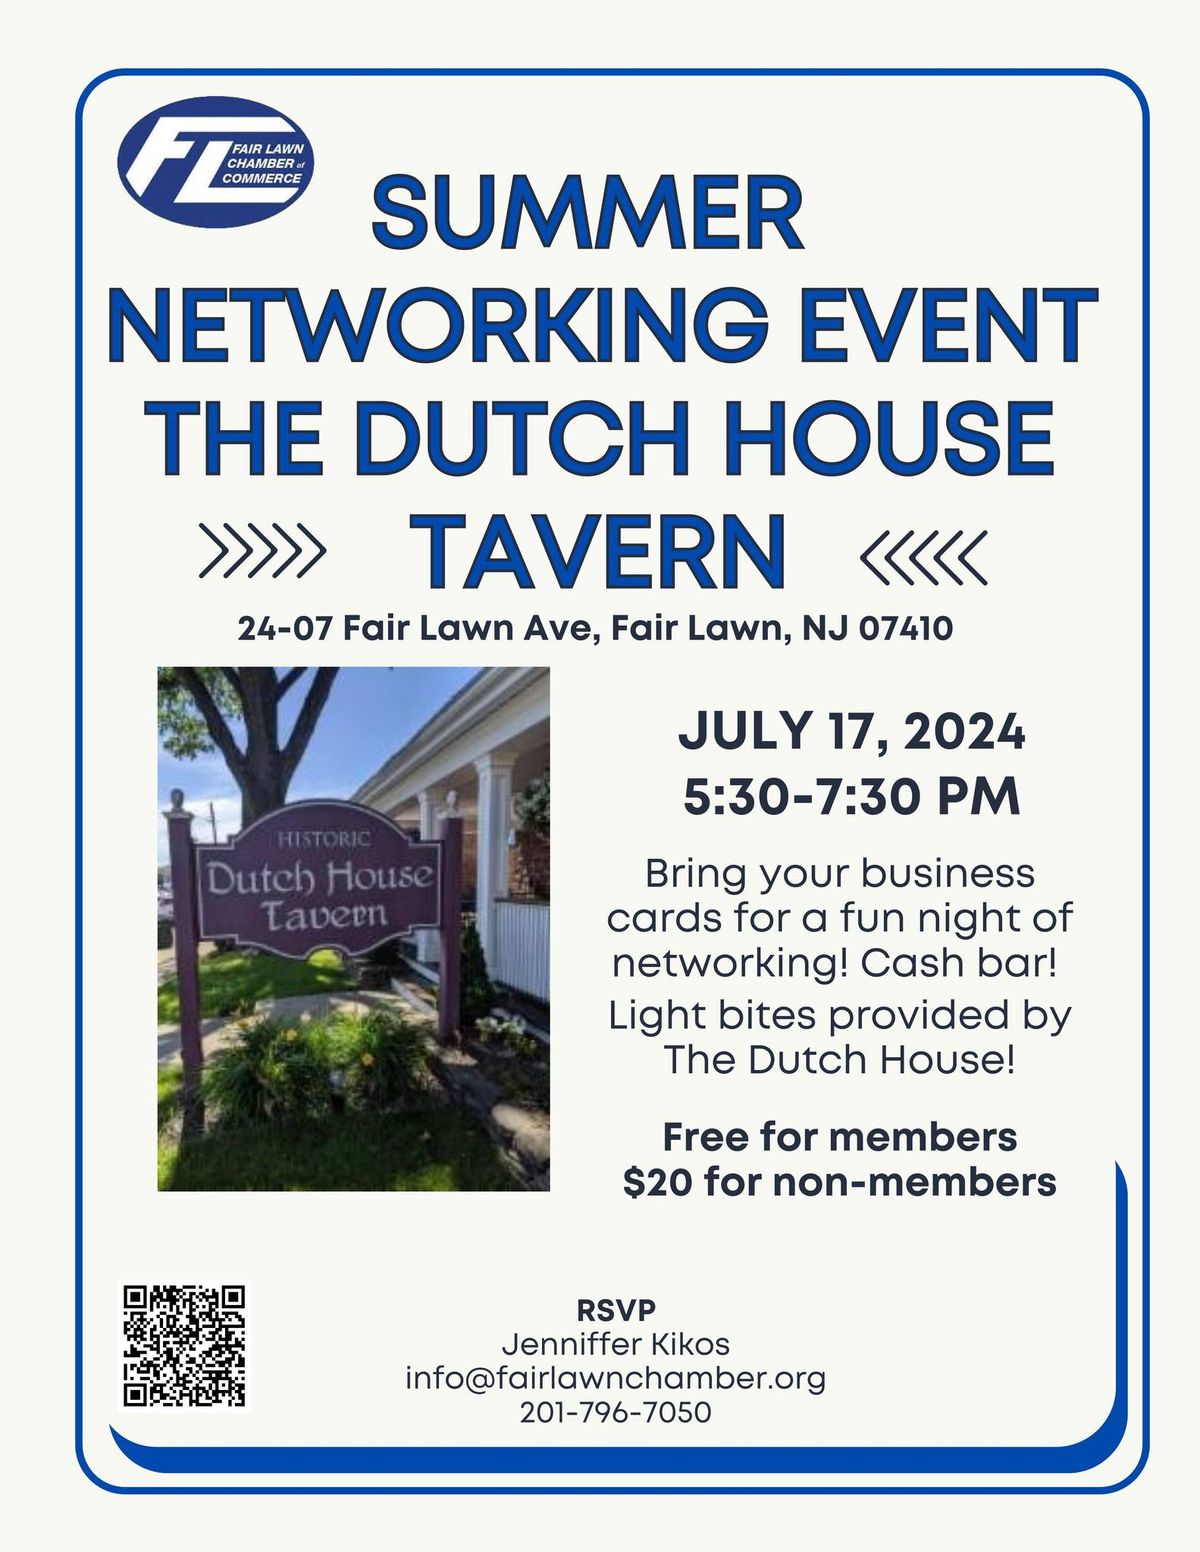 Summer Networking at the Dutch House Tavern